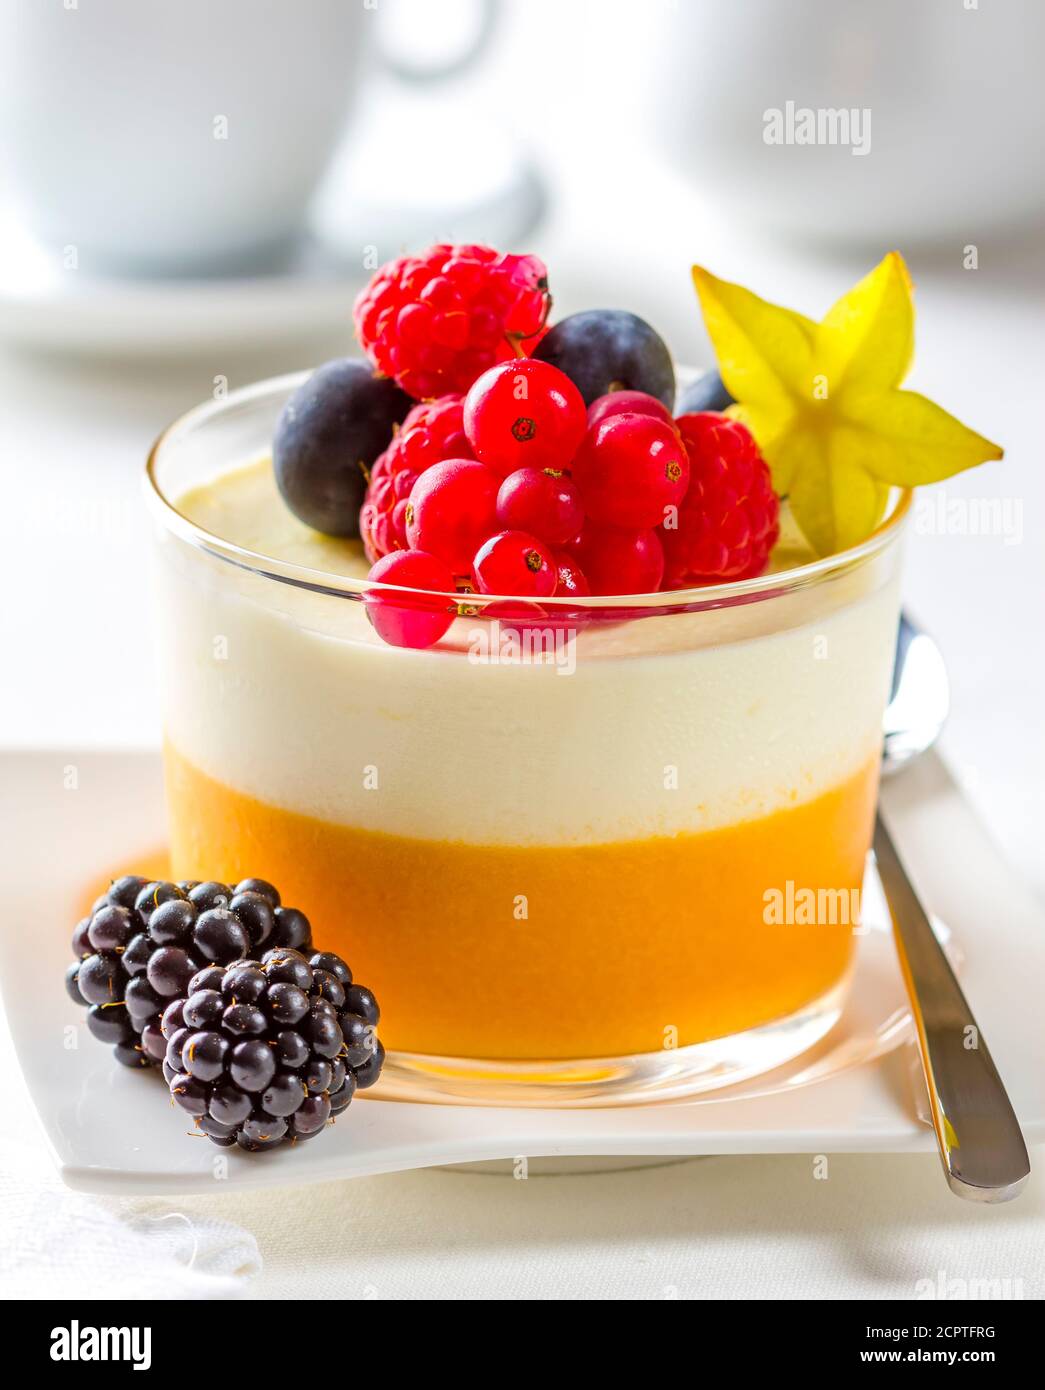 Cheesecake mousse dessert served with fruit in a glass. Stock Photo